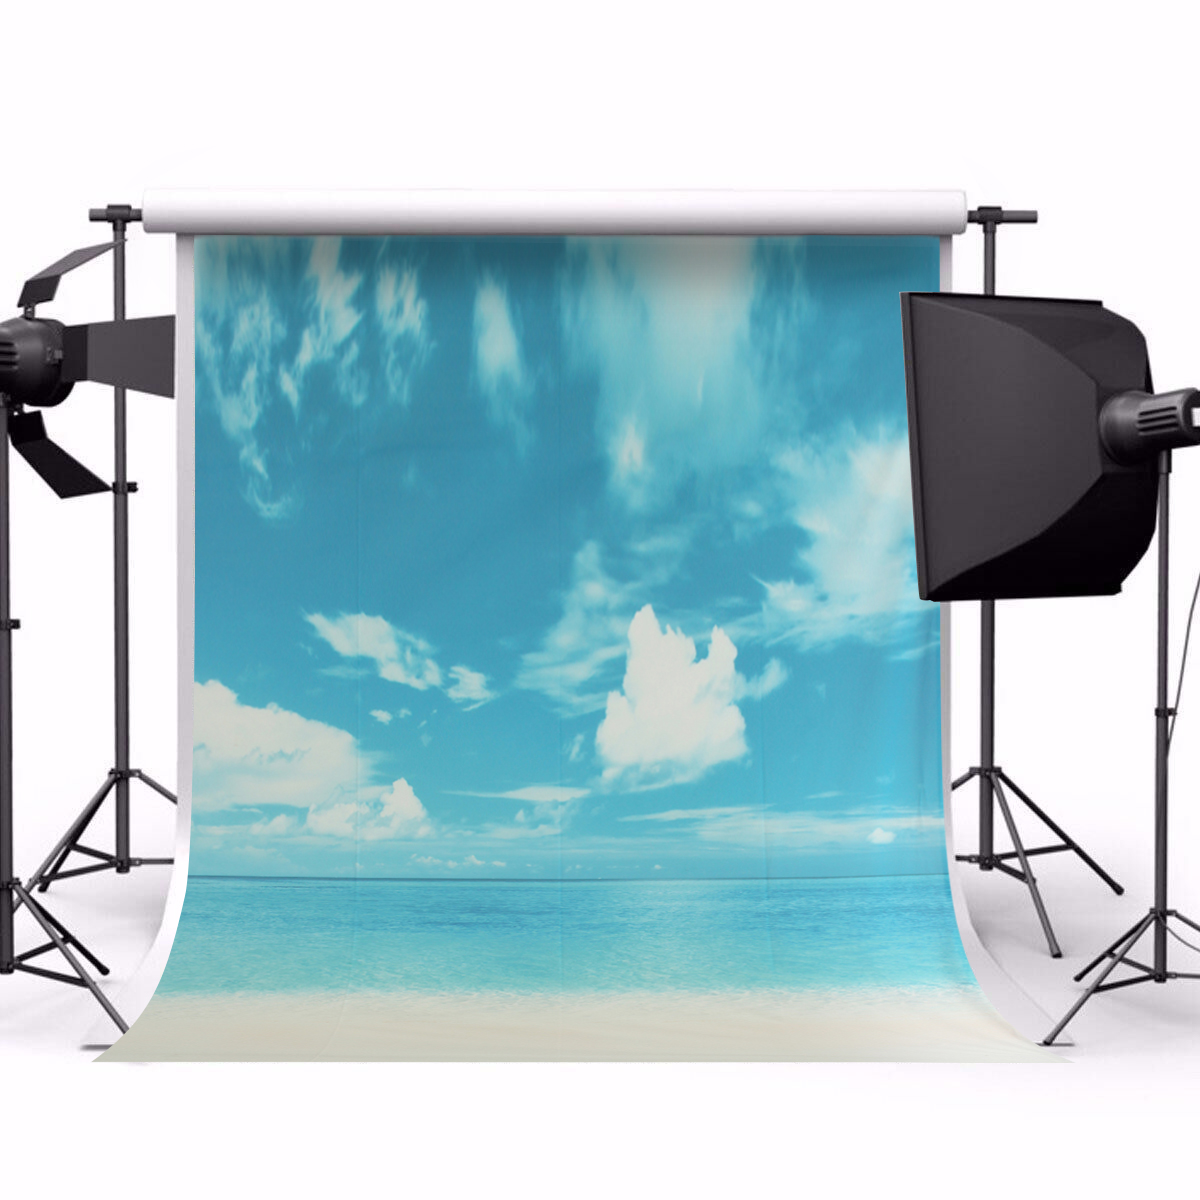 New-Durable-5x7ft-Cotton-Photography-Backdrop-Seaside-Beach-Background-Studio-Props-1952558-2